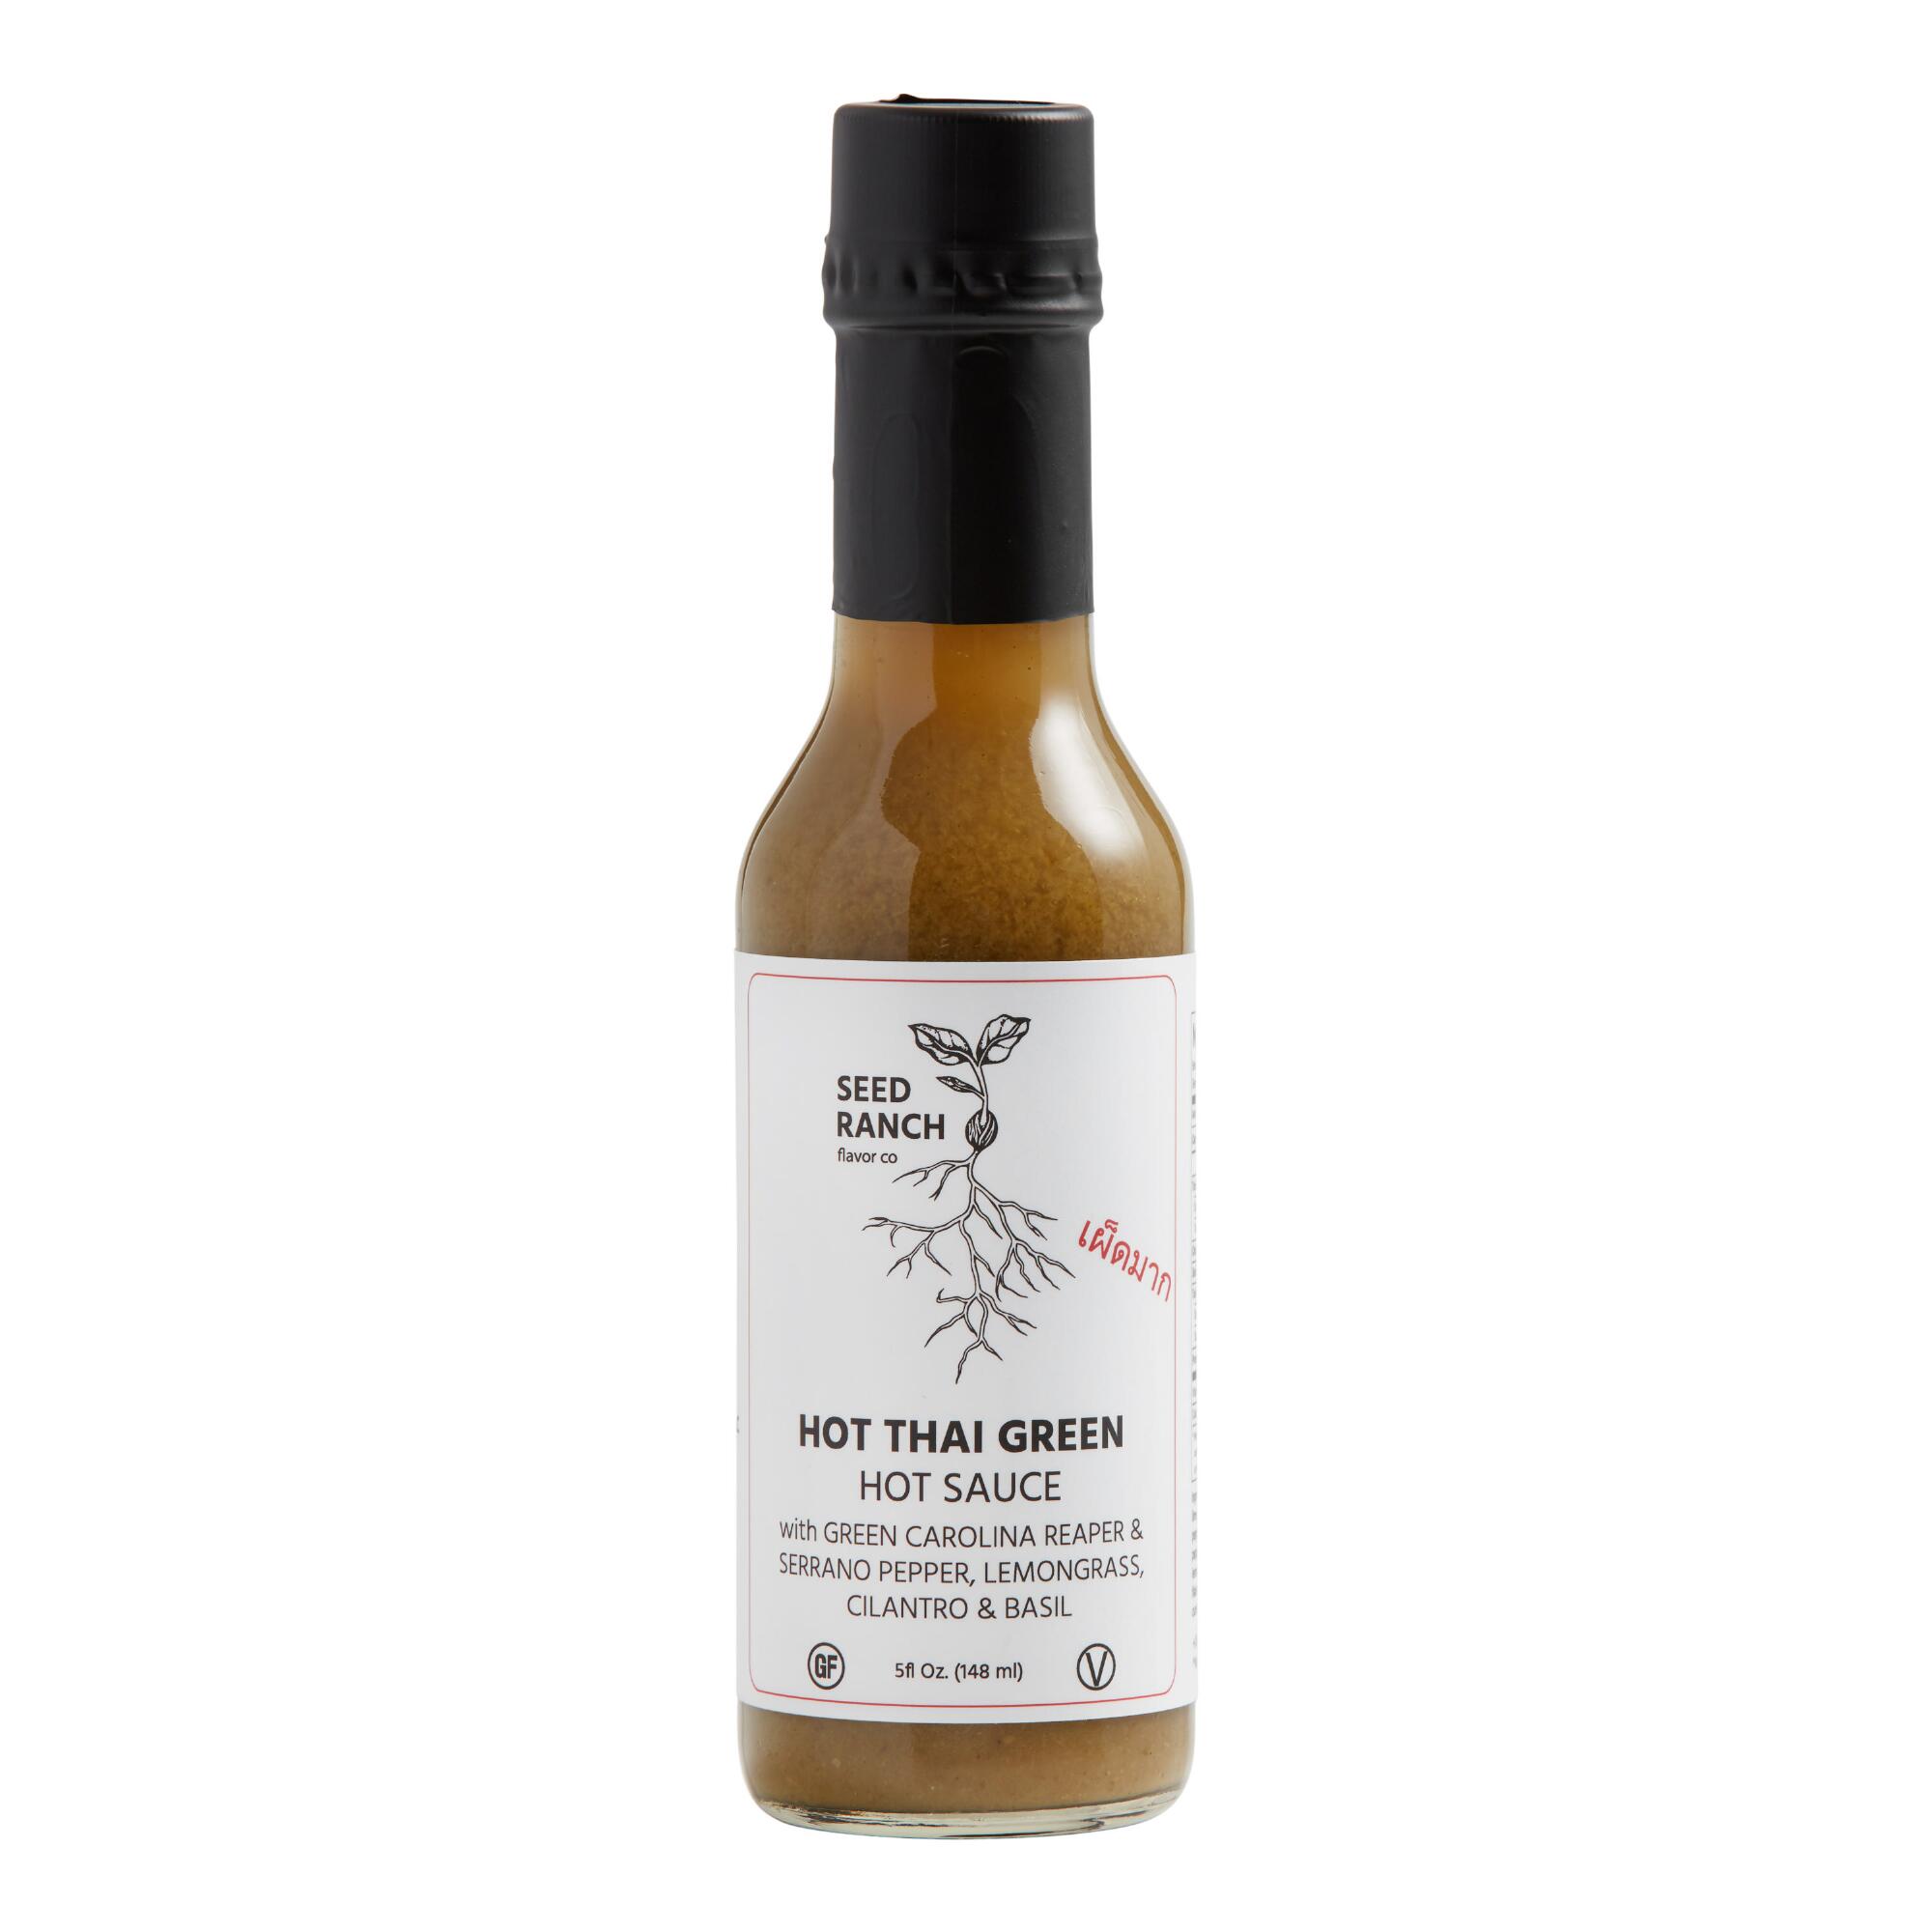 Seed Ranch Hot Thai Green Hot Sauce by World Market